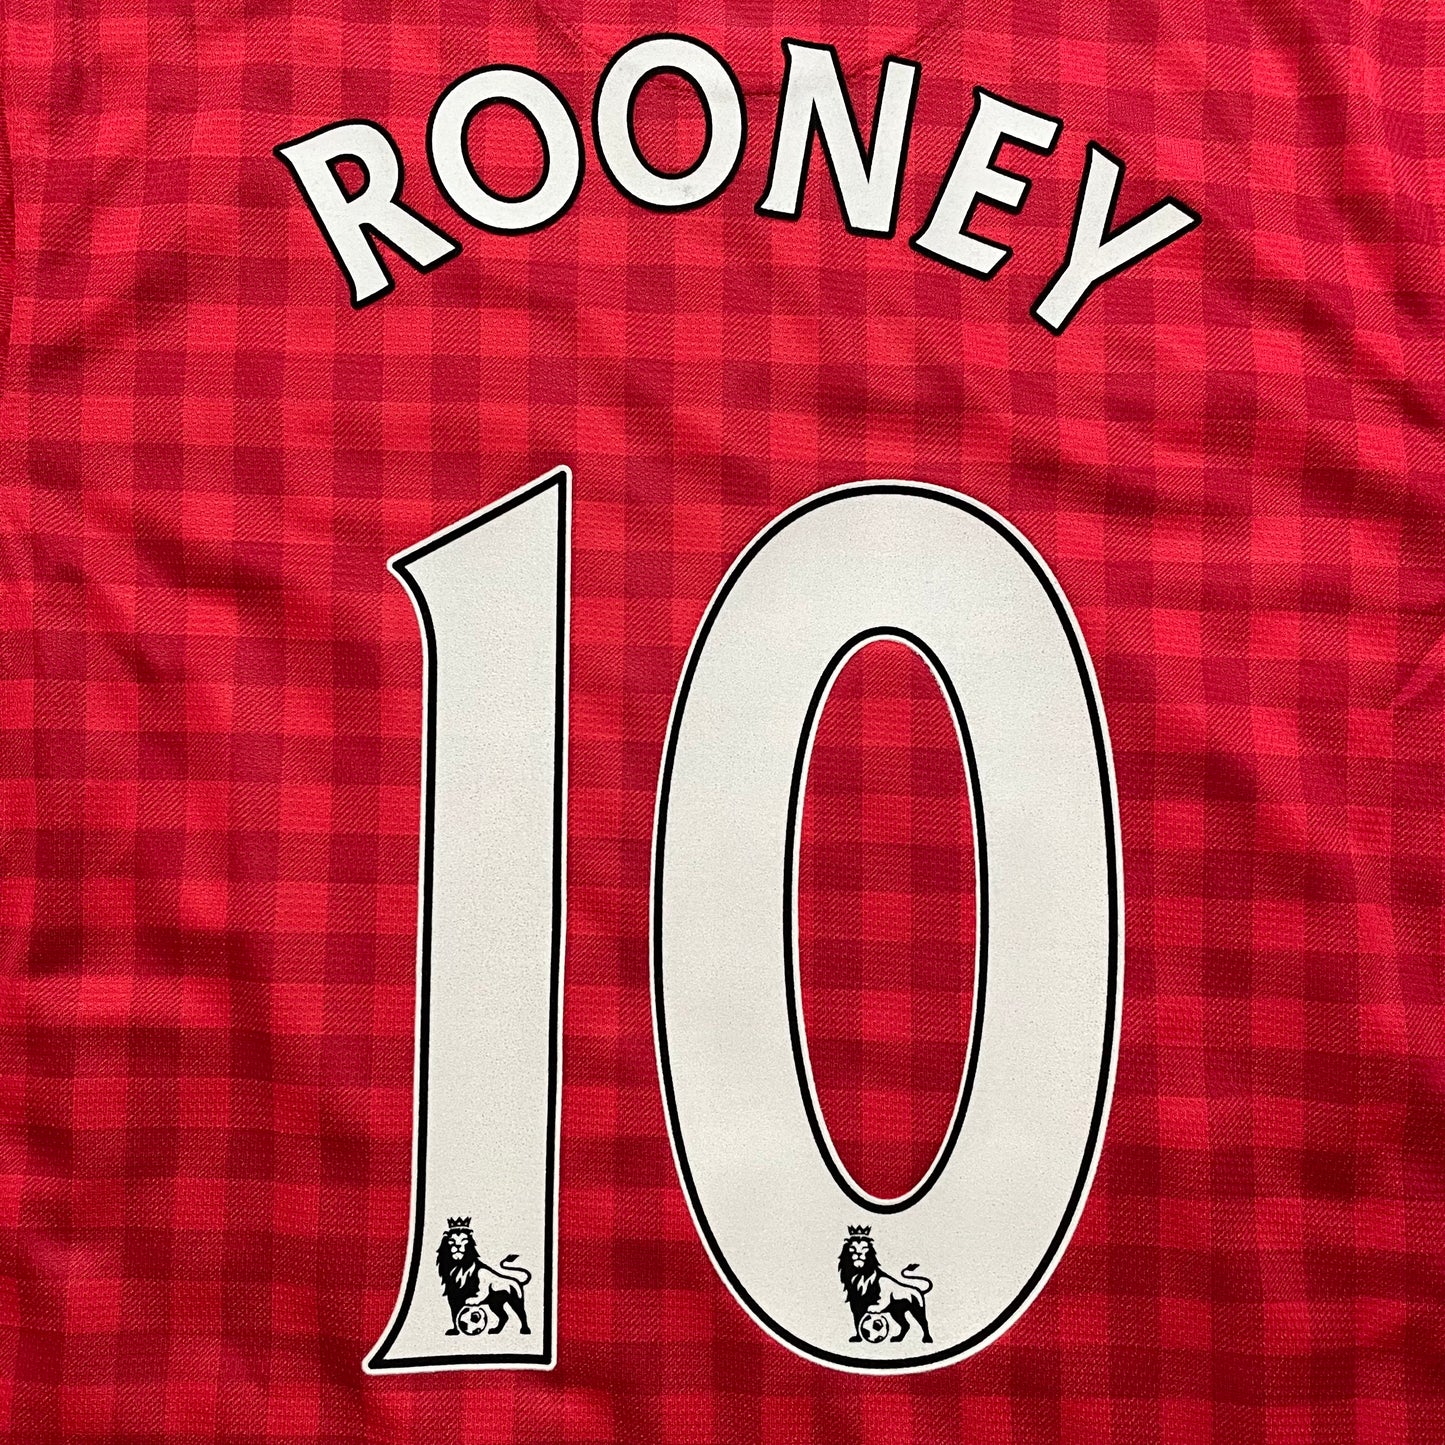 2012-2013 Manchester United FC home shirt #10 Rooney (M)